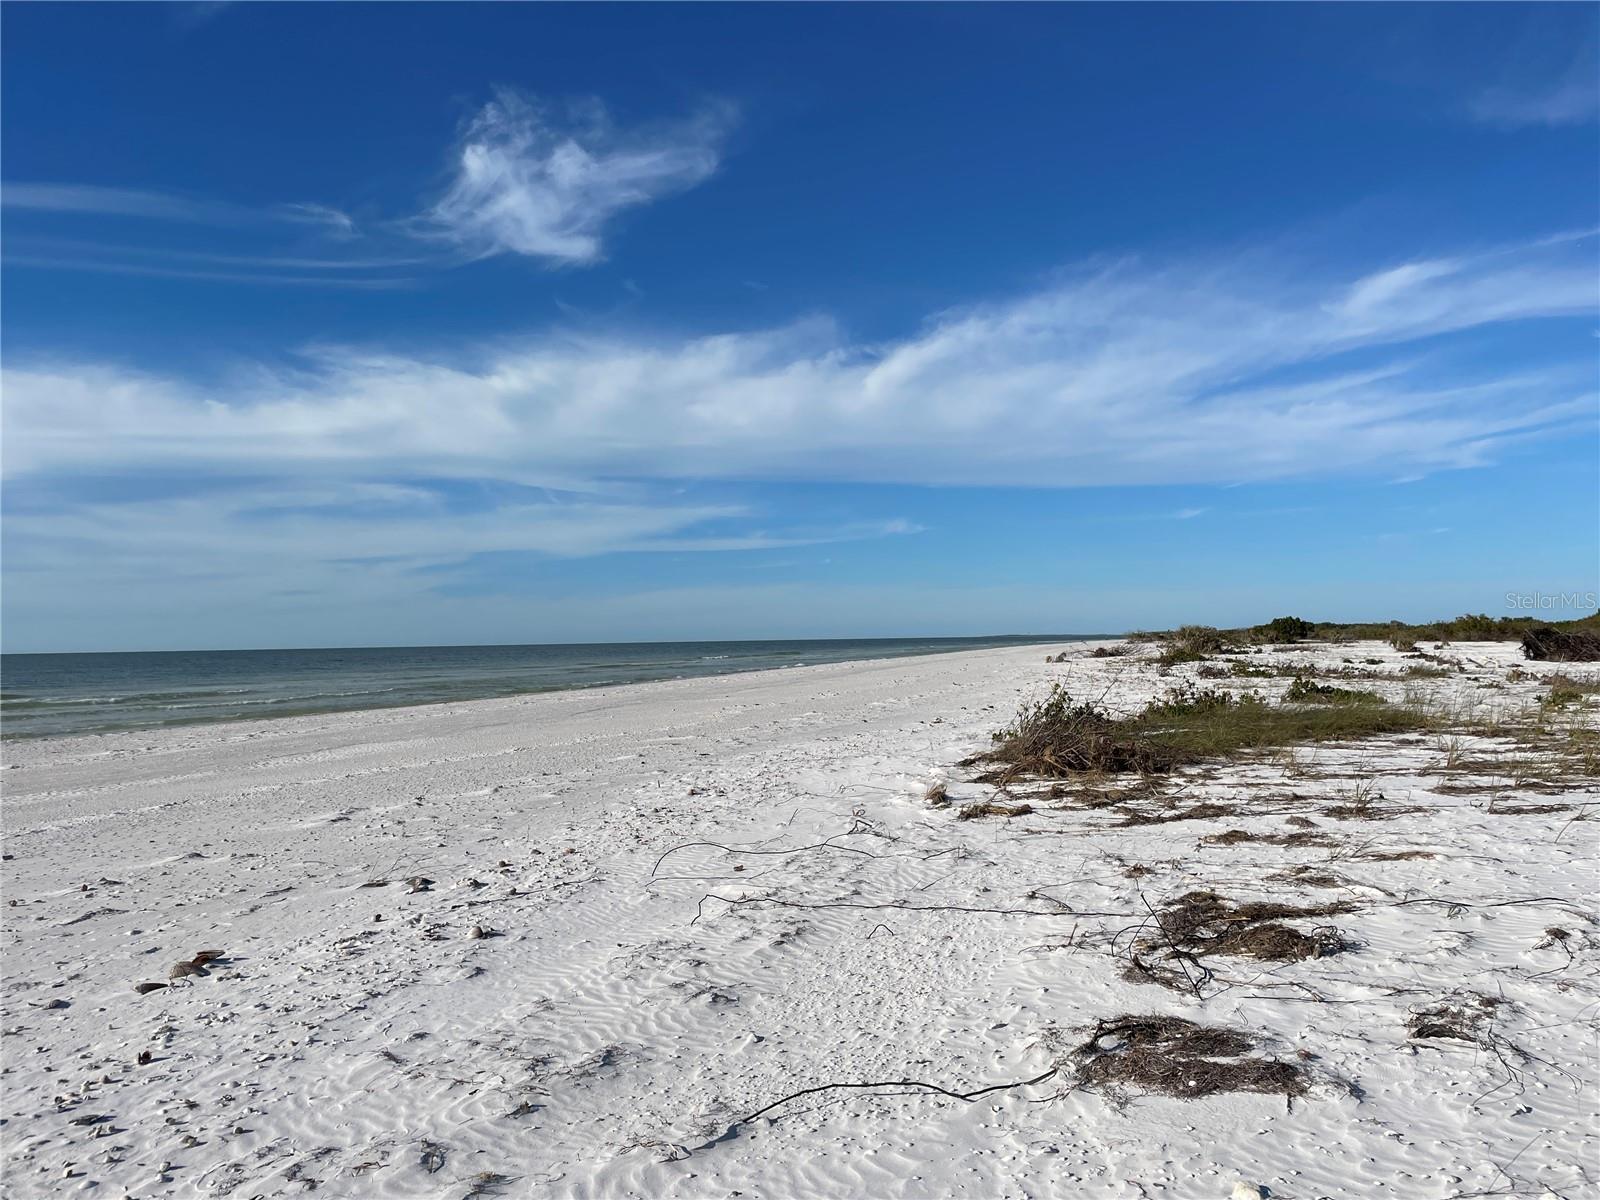 Honeymoon Island has miles of beaches to relax, collect shells or take a long walk